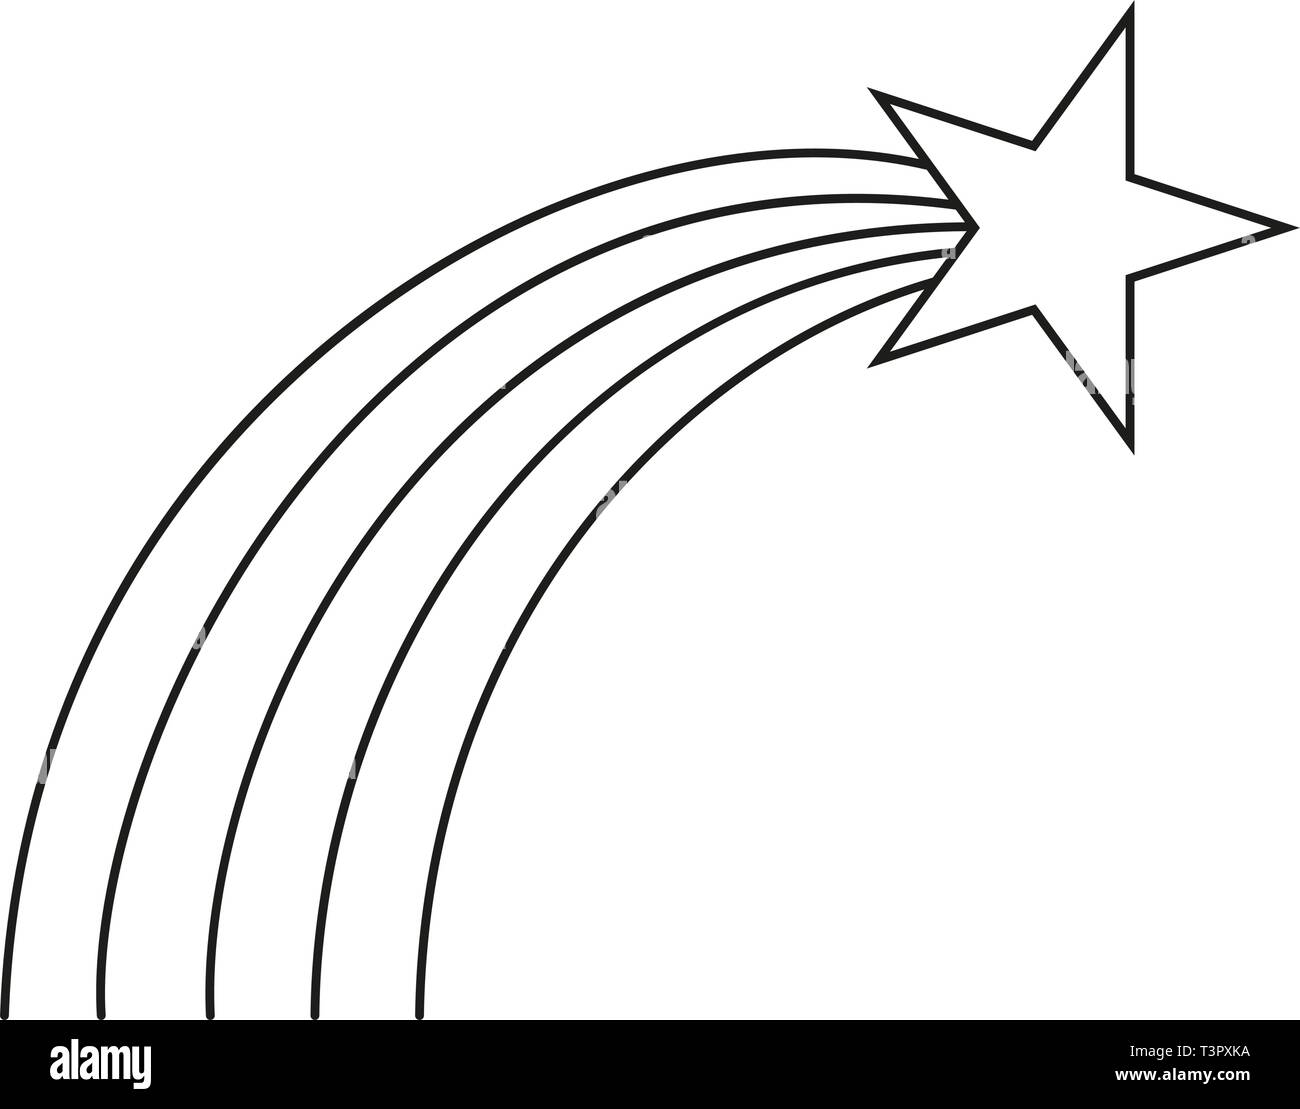 shooting star clip art black and white